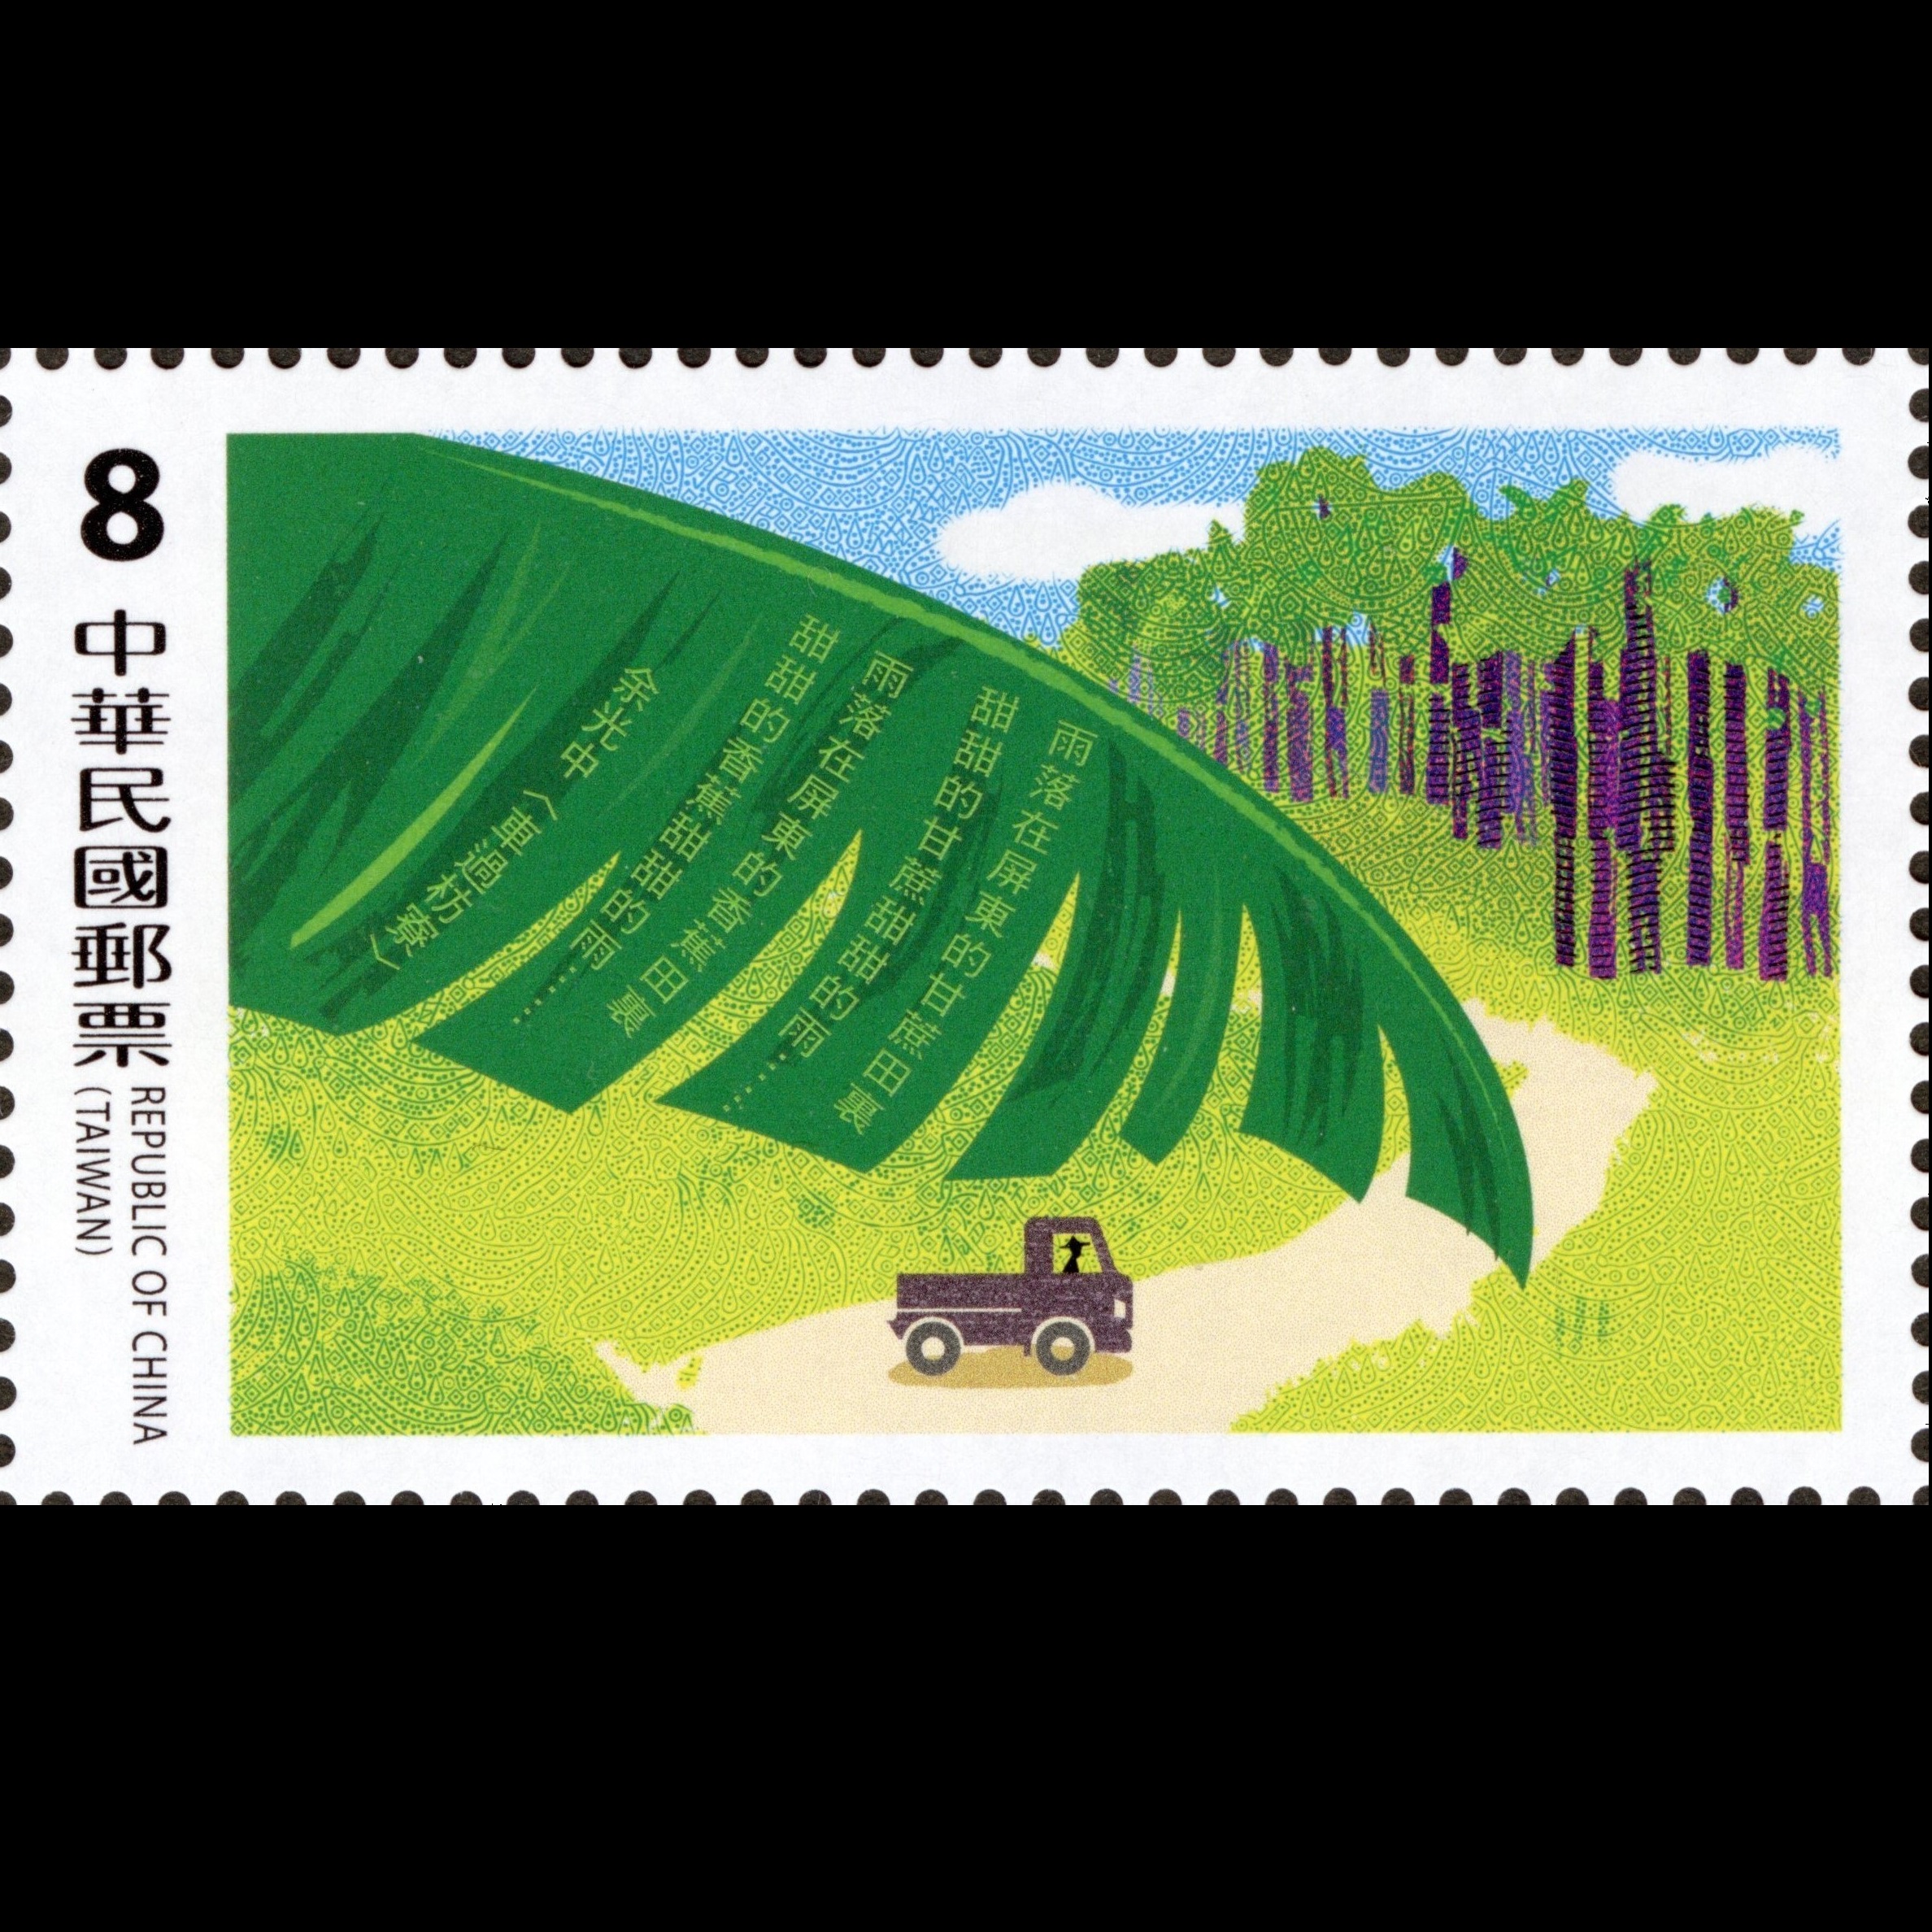 Sp.740 TAIPEI 2023 – 39th Asian International Stamp Exhibition Postage Stamps: Taiwan in Literature